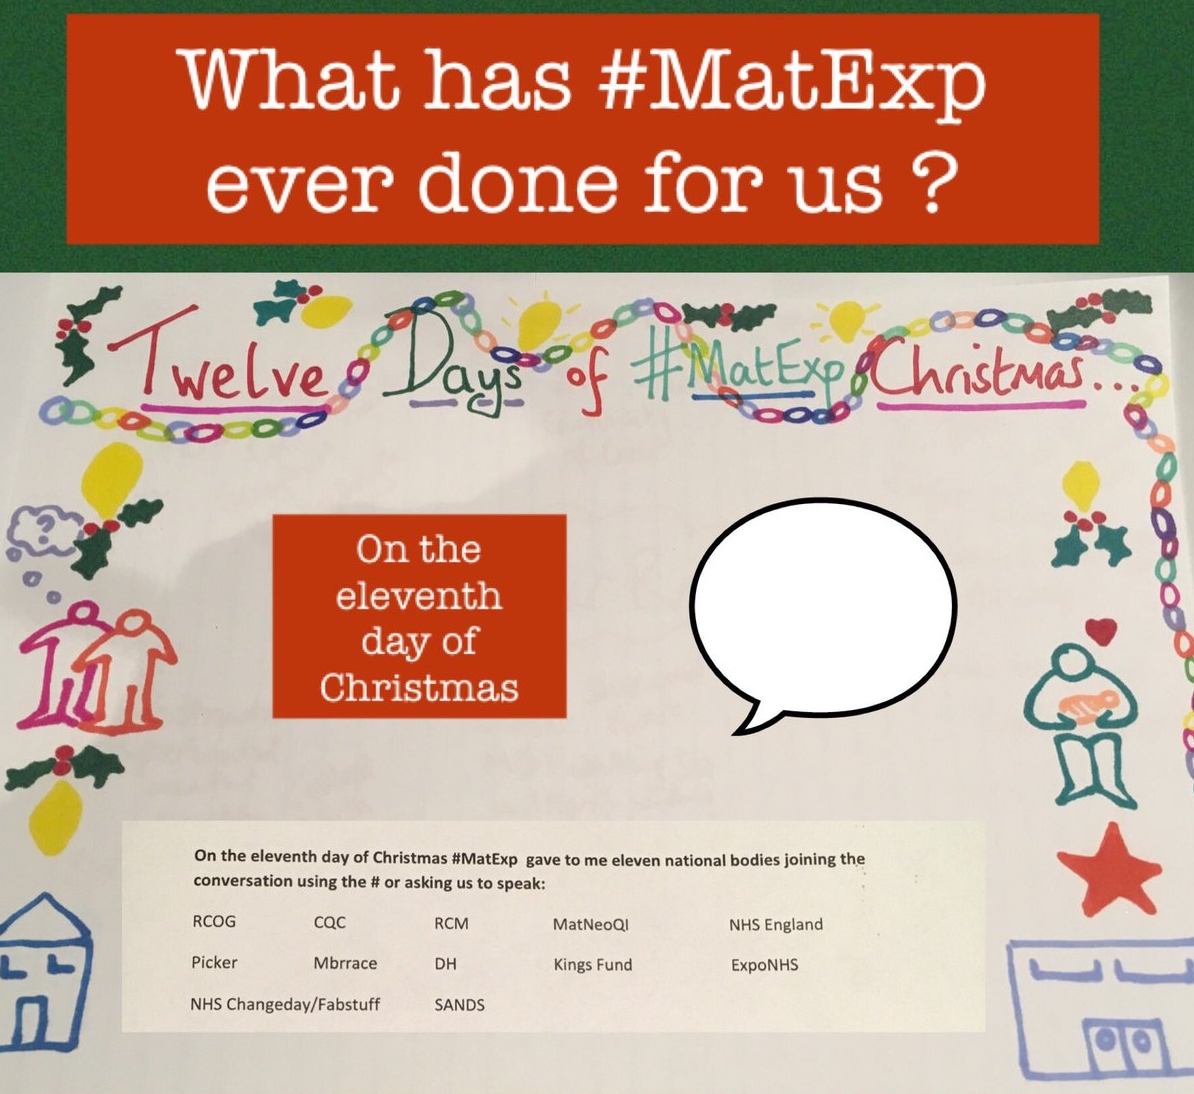 MatExp 12 days of Christmas Day 11